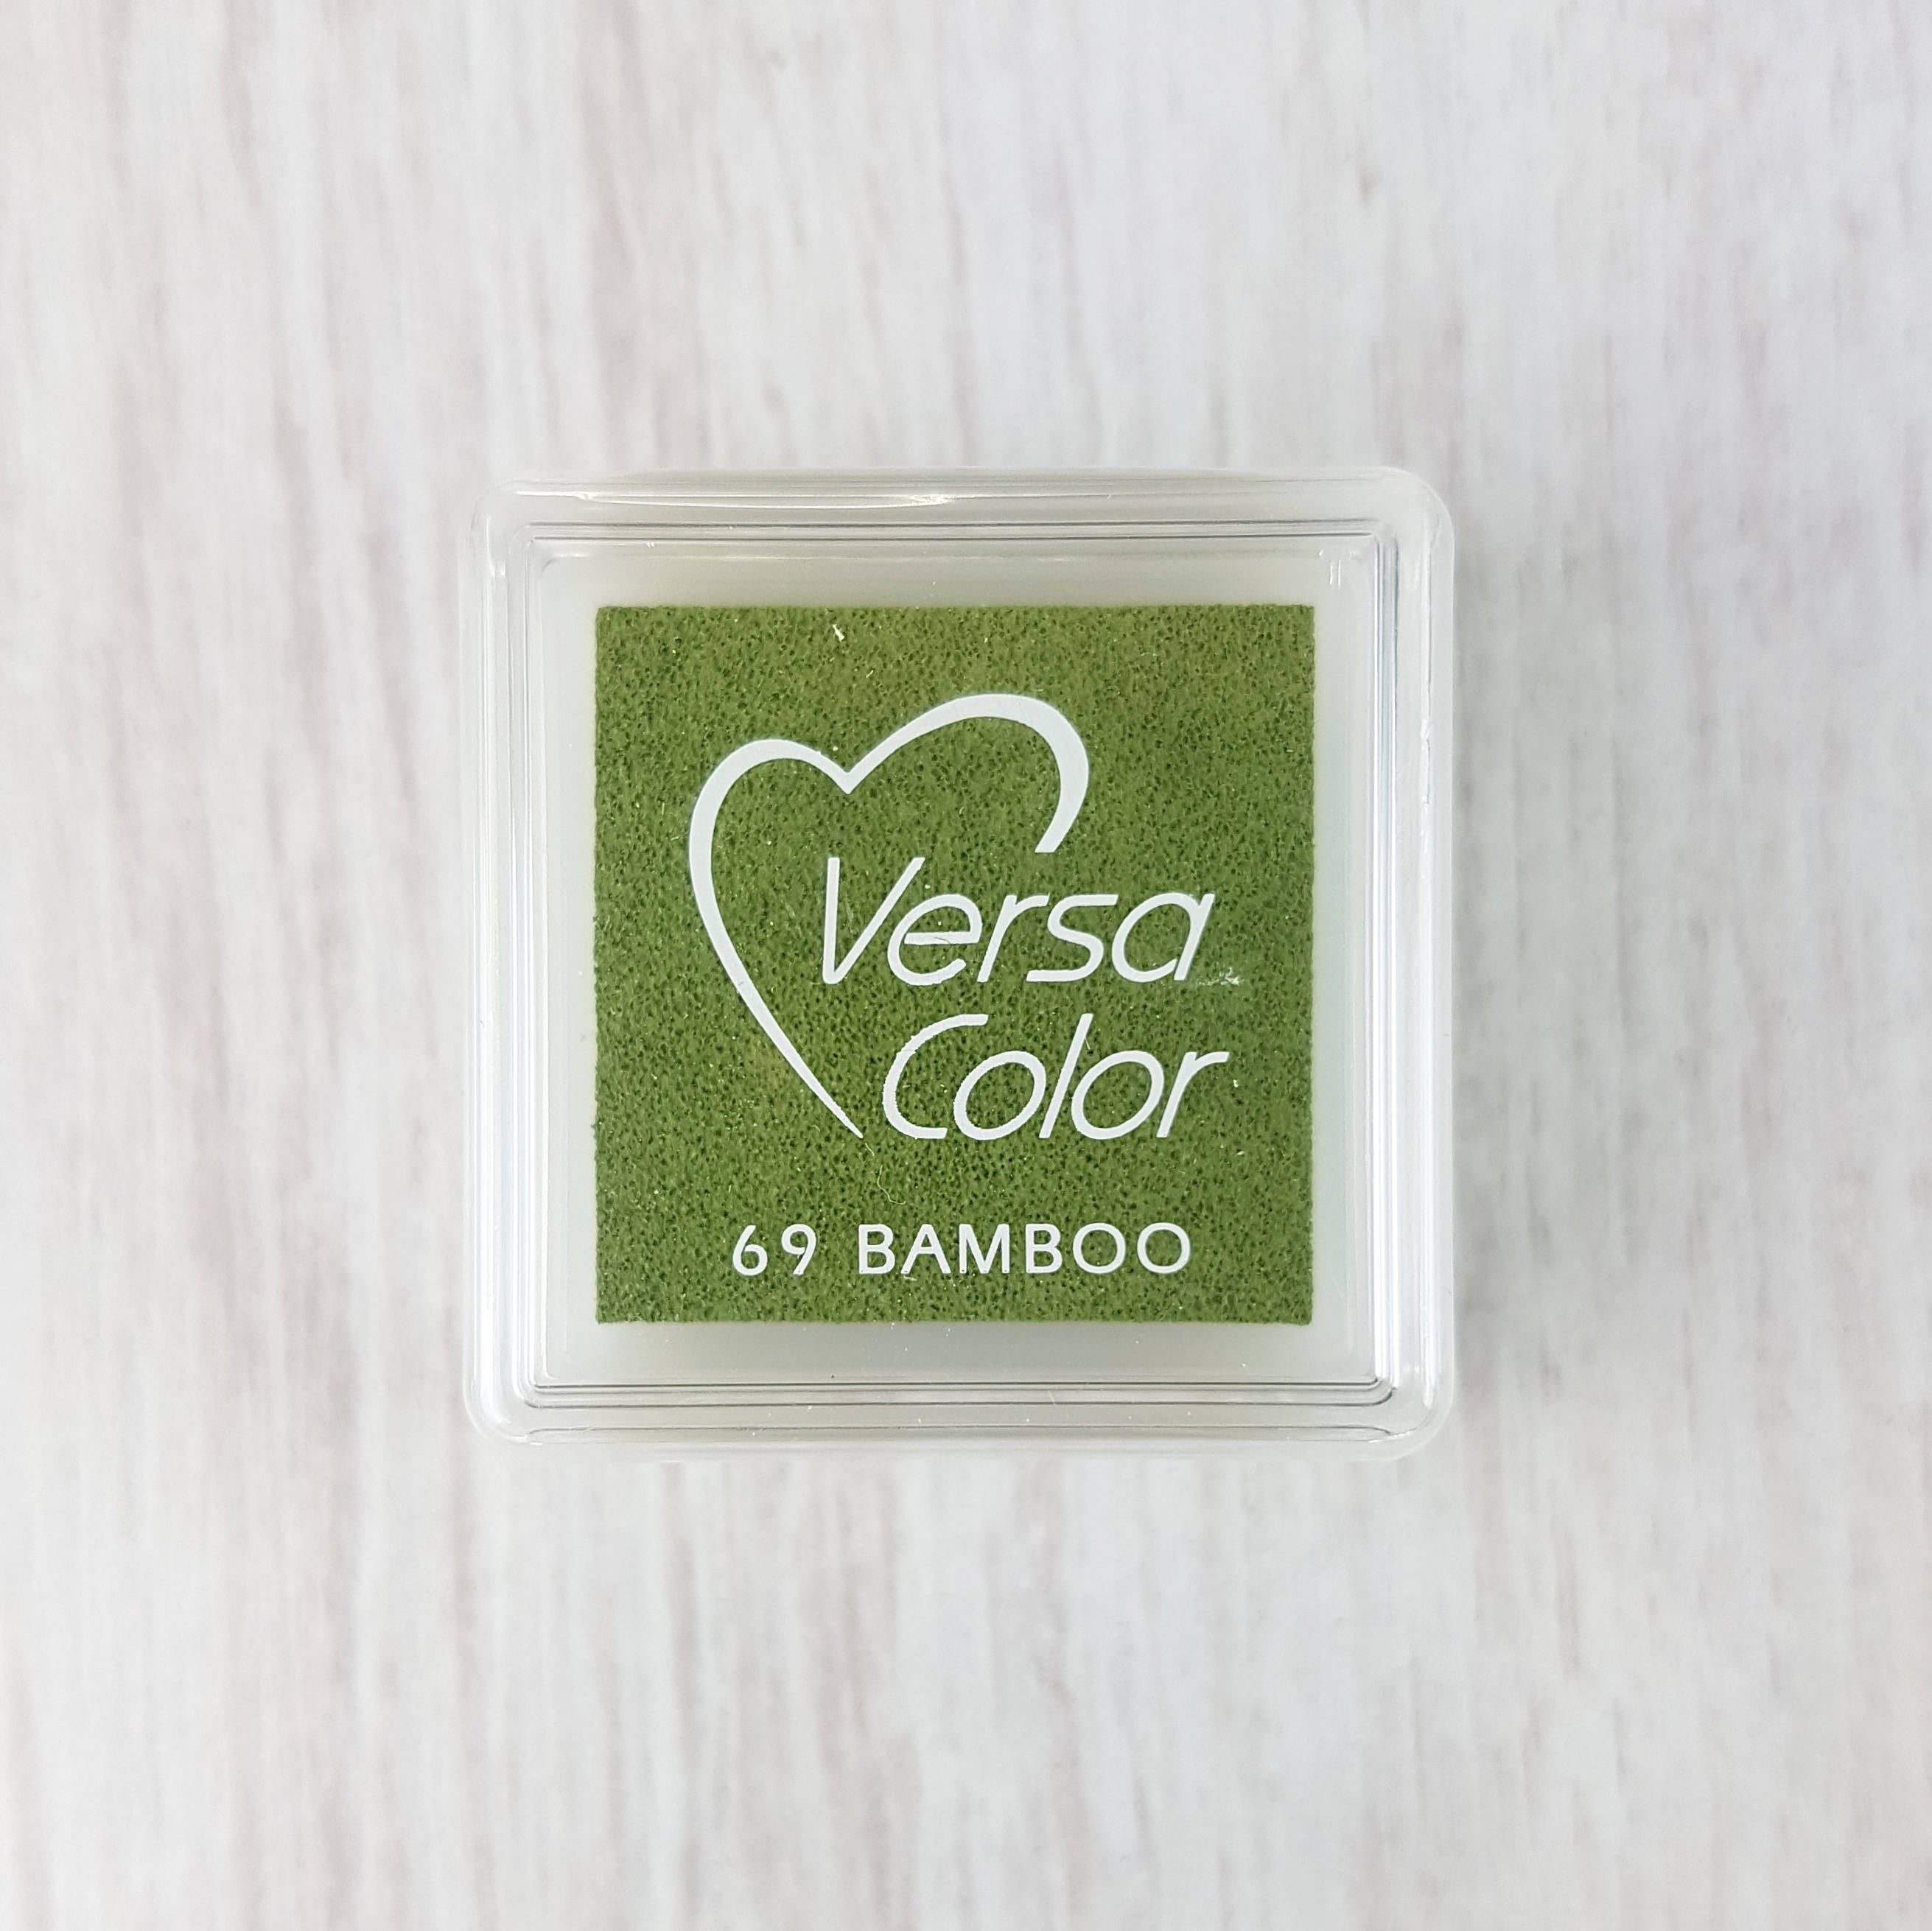 Versacolor Pigment Ink Pad Small in Lime Ink for Stamp Inkpad for Rubber  Stamp Versa Color Colour Ink Pad Green Ink Green Inkpad 